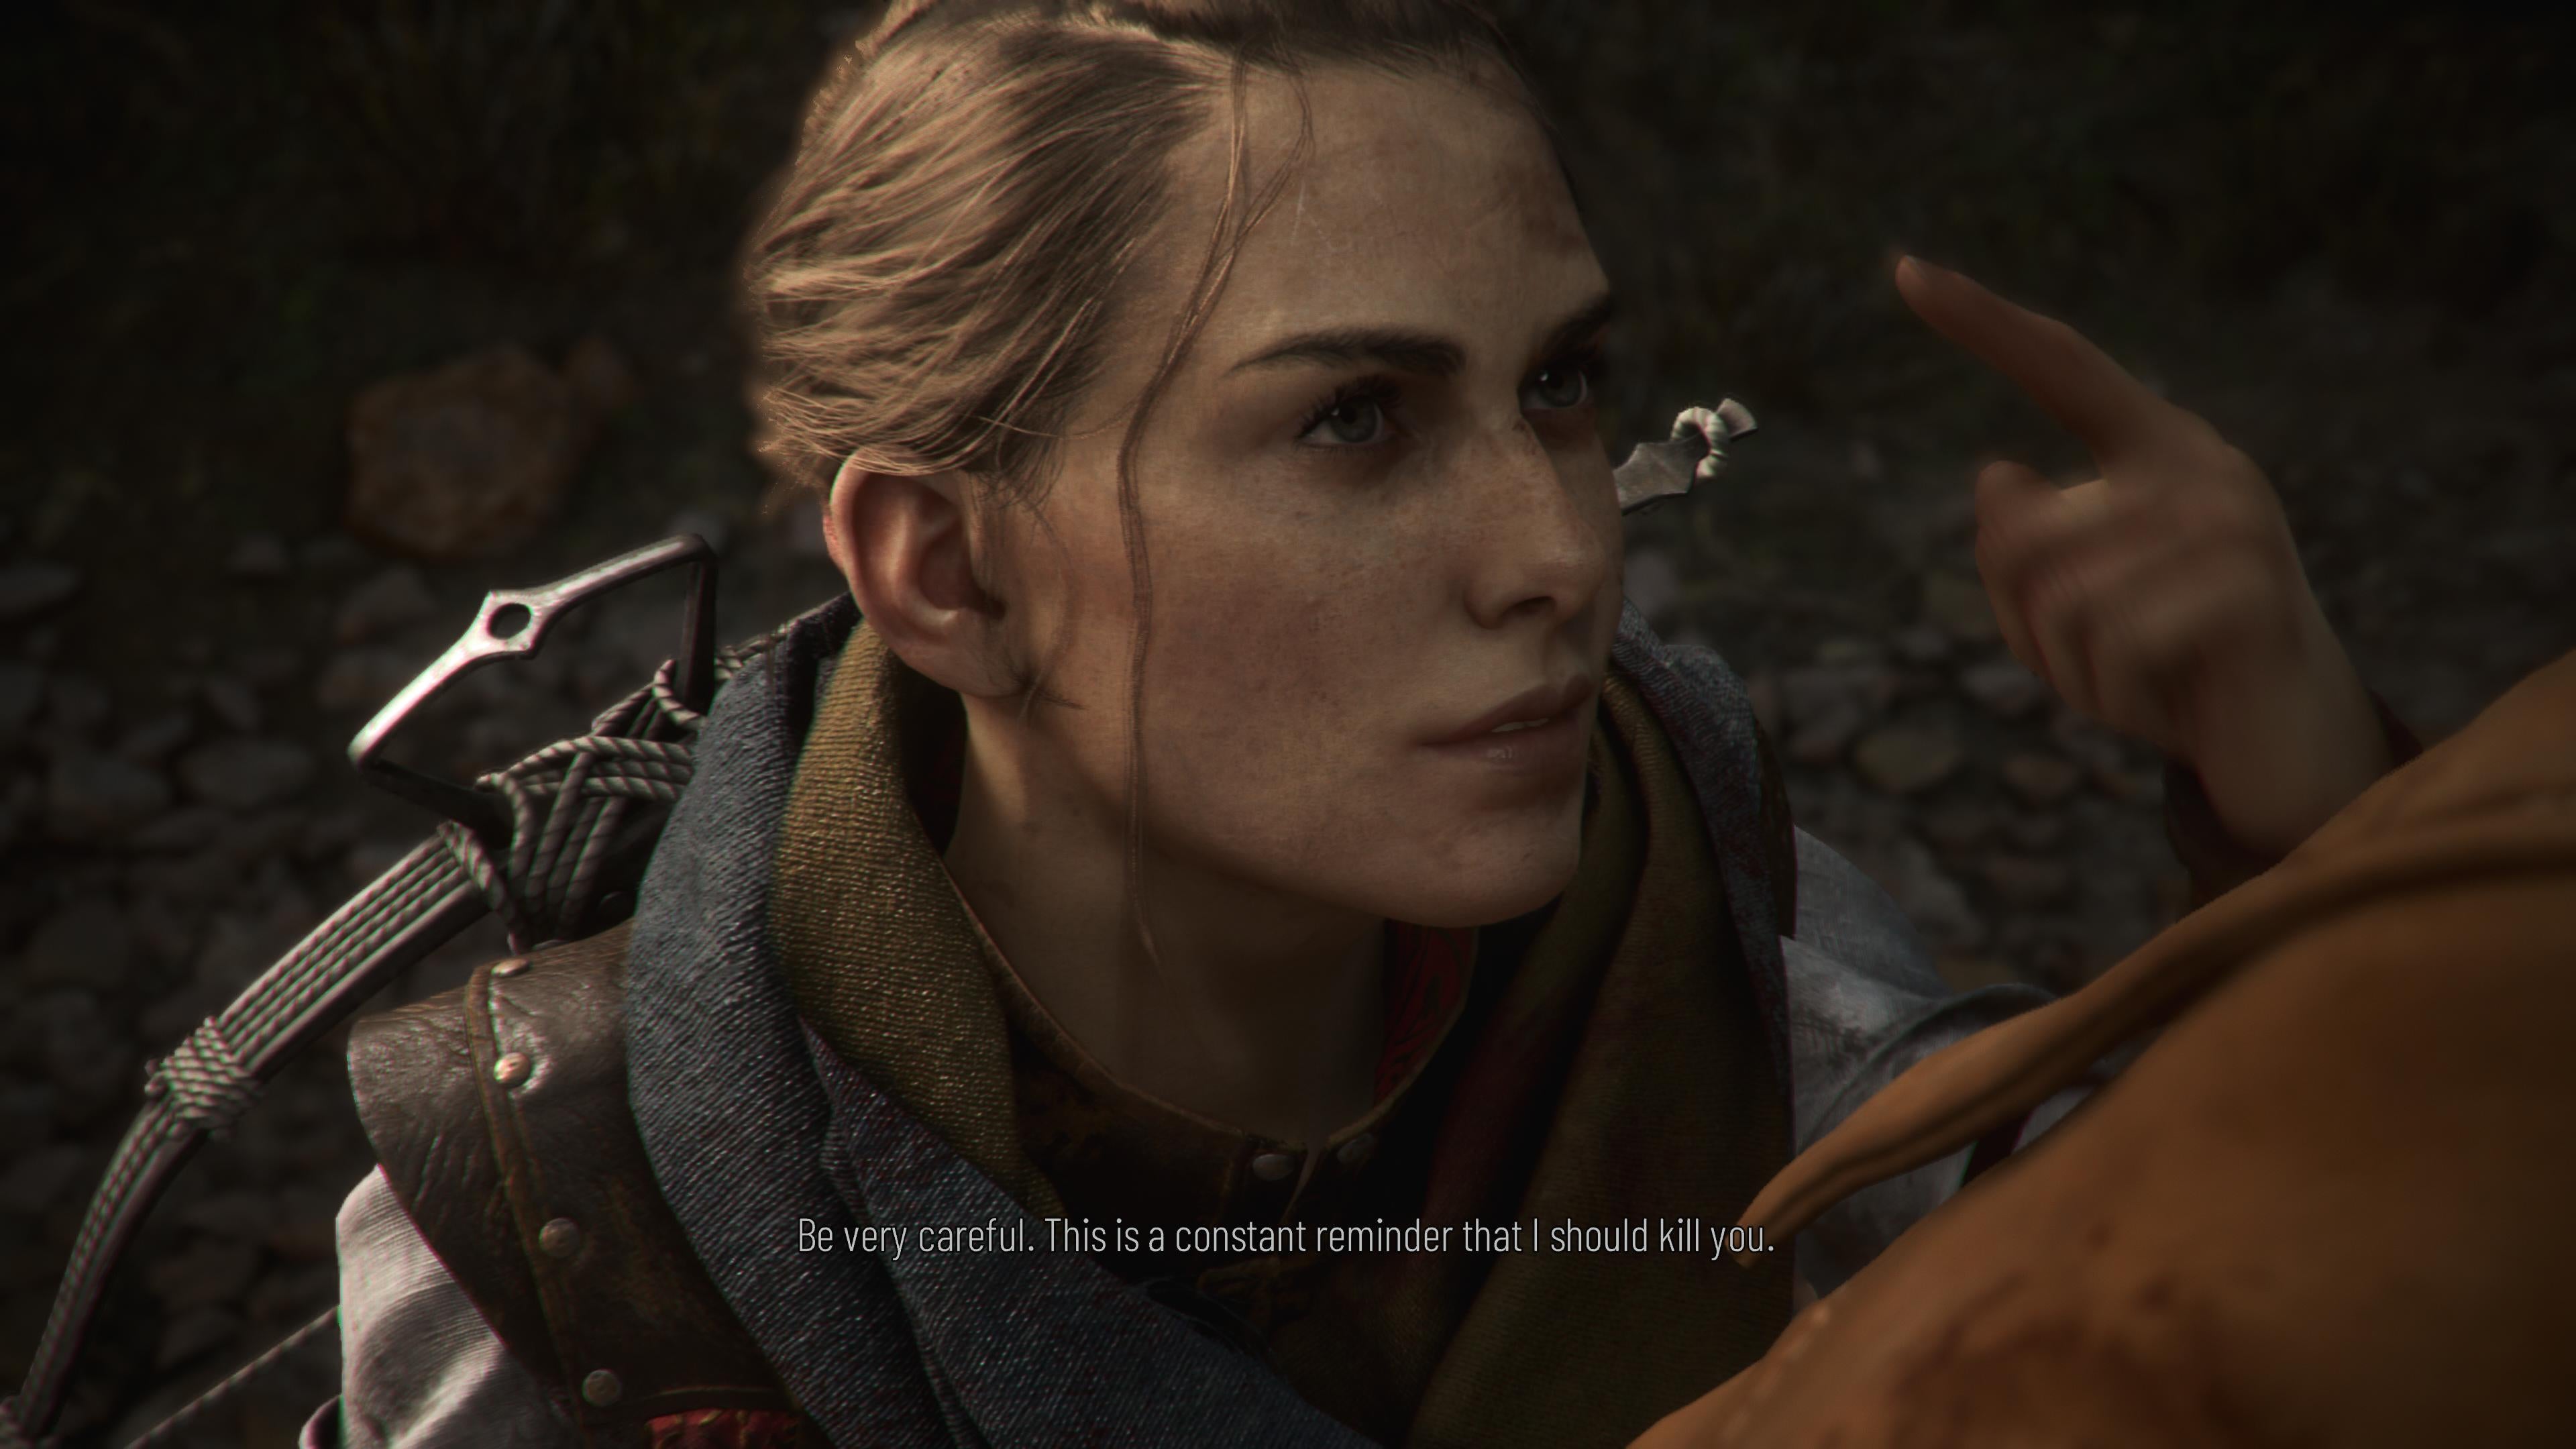 Heroine Amicia warns another character in A Plague Tale that she will kill them if they step out of line.